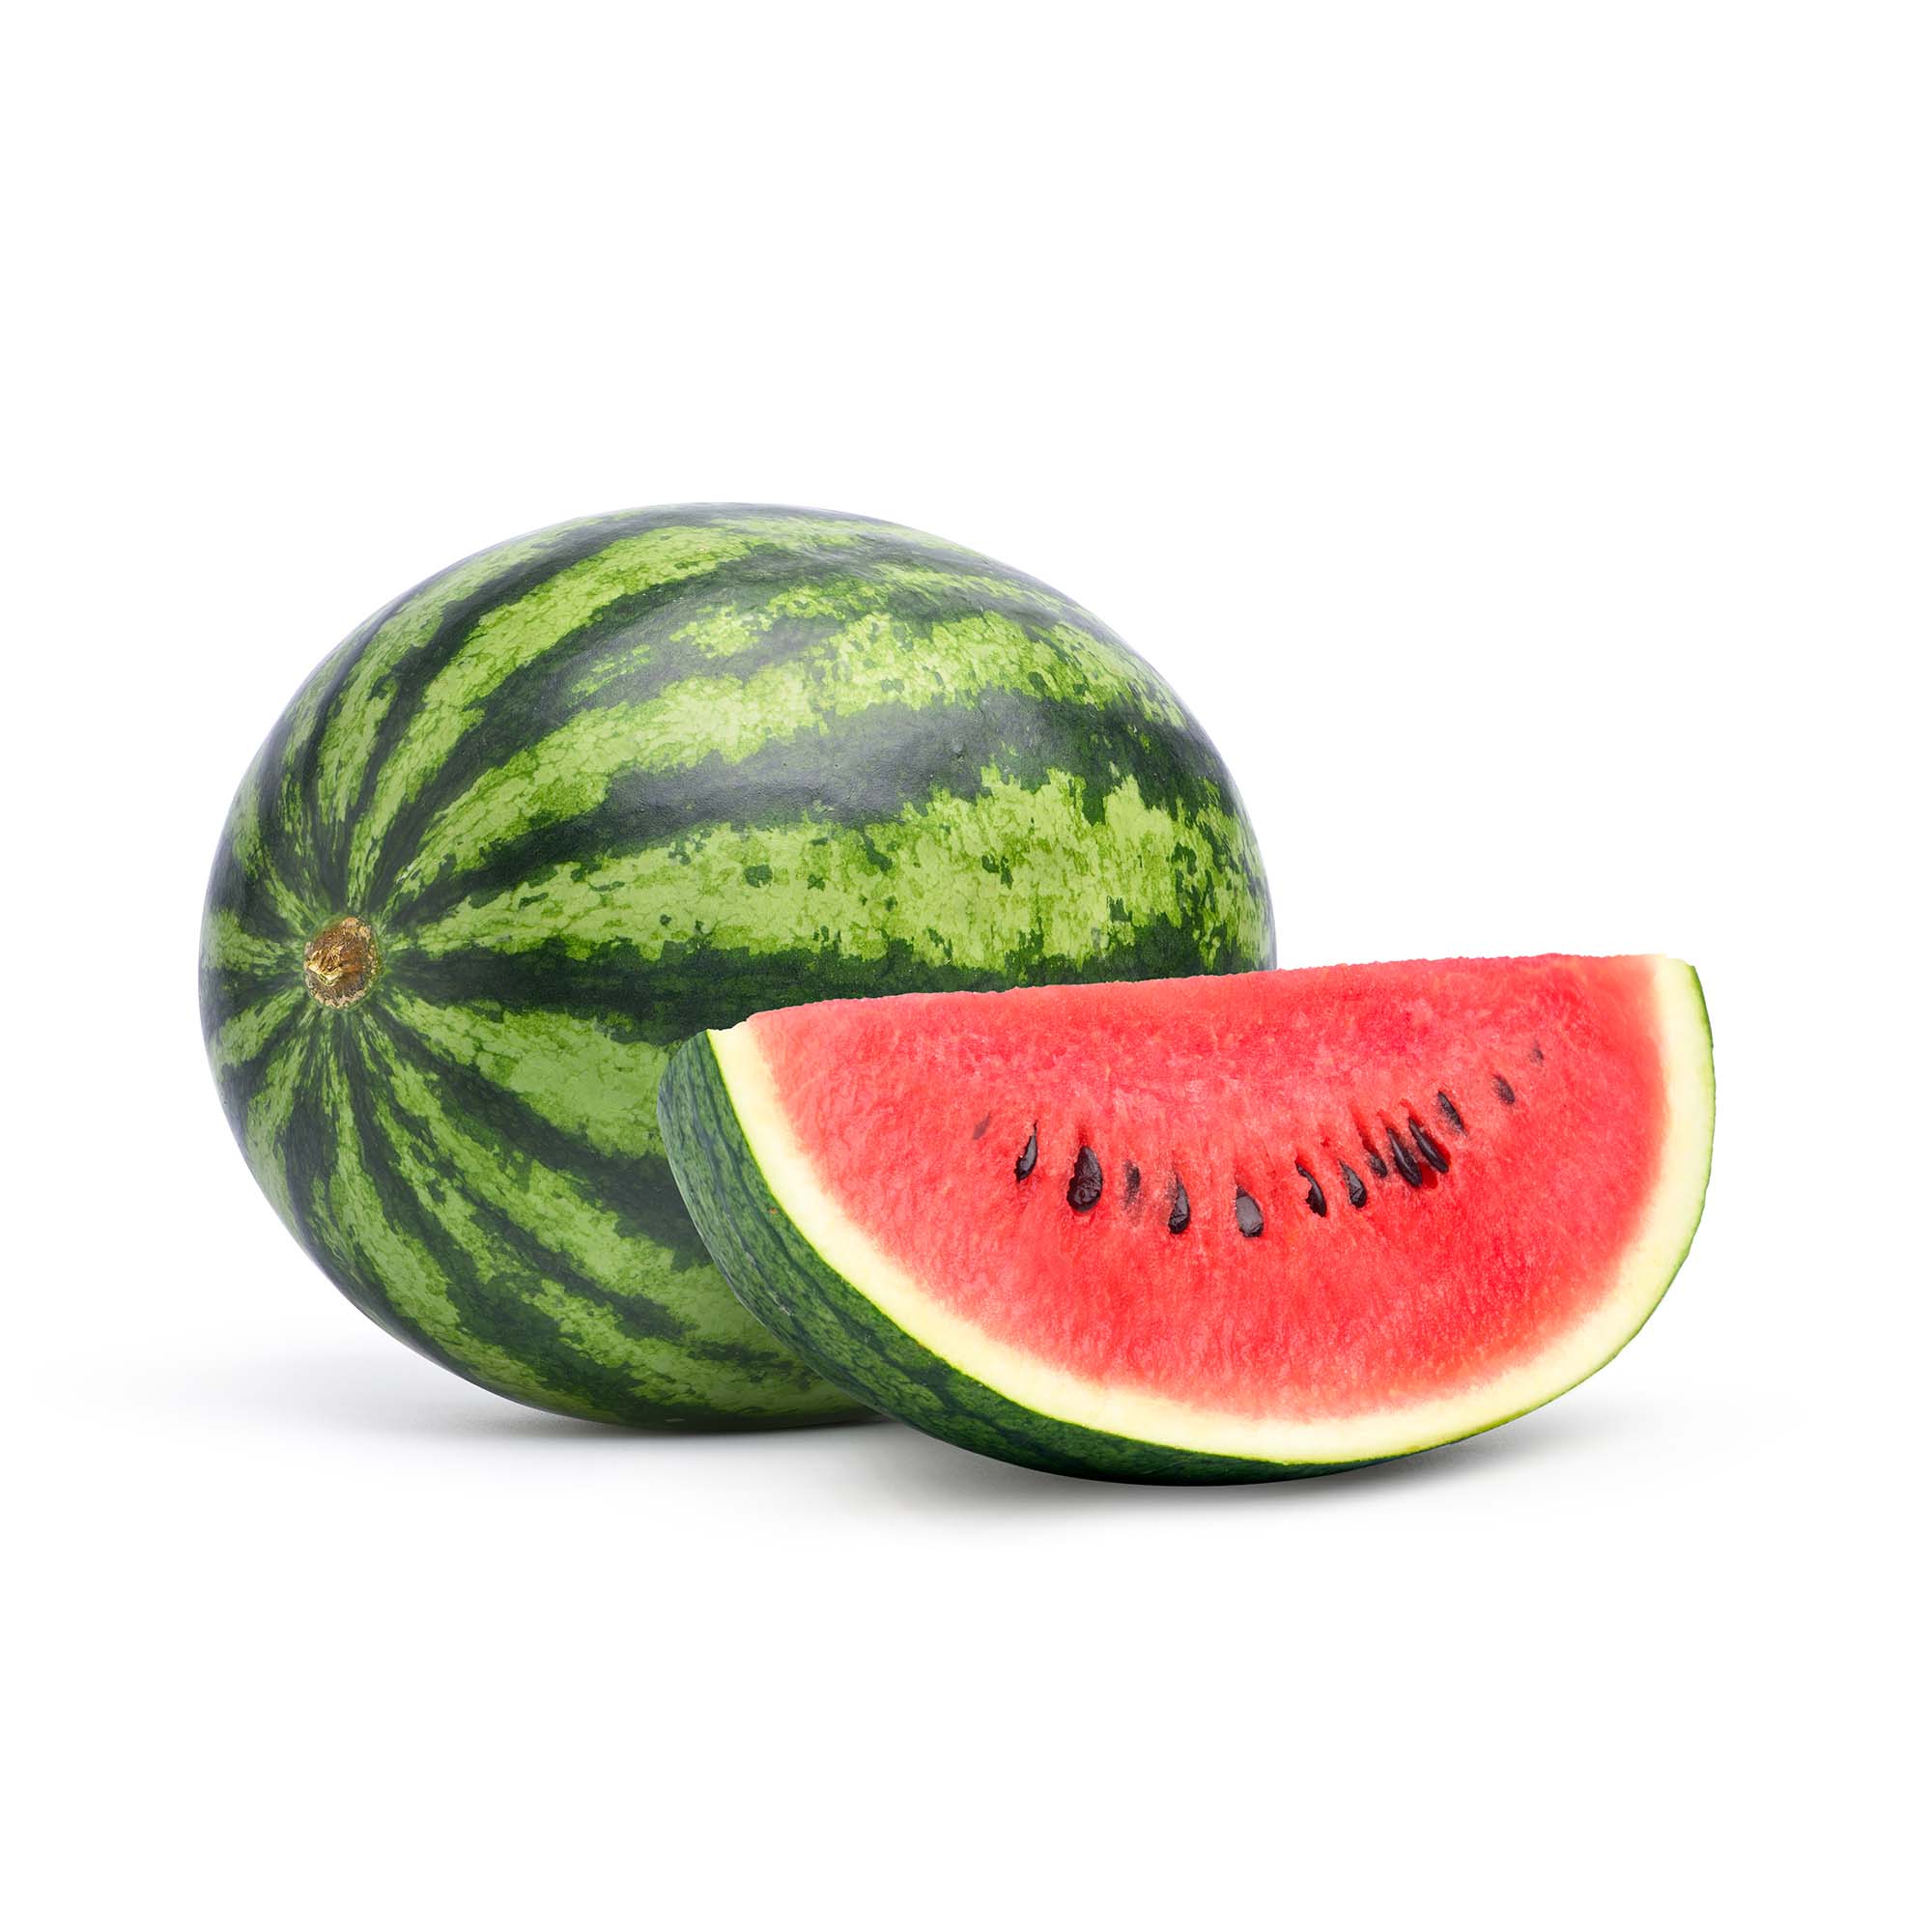 Watermelon image - Agro trade for import & export [Mahdy Fresh - since 2000]